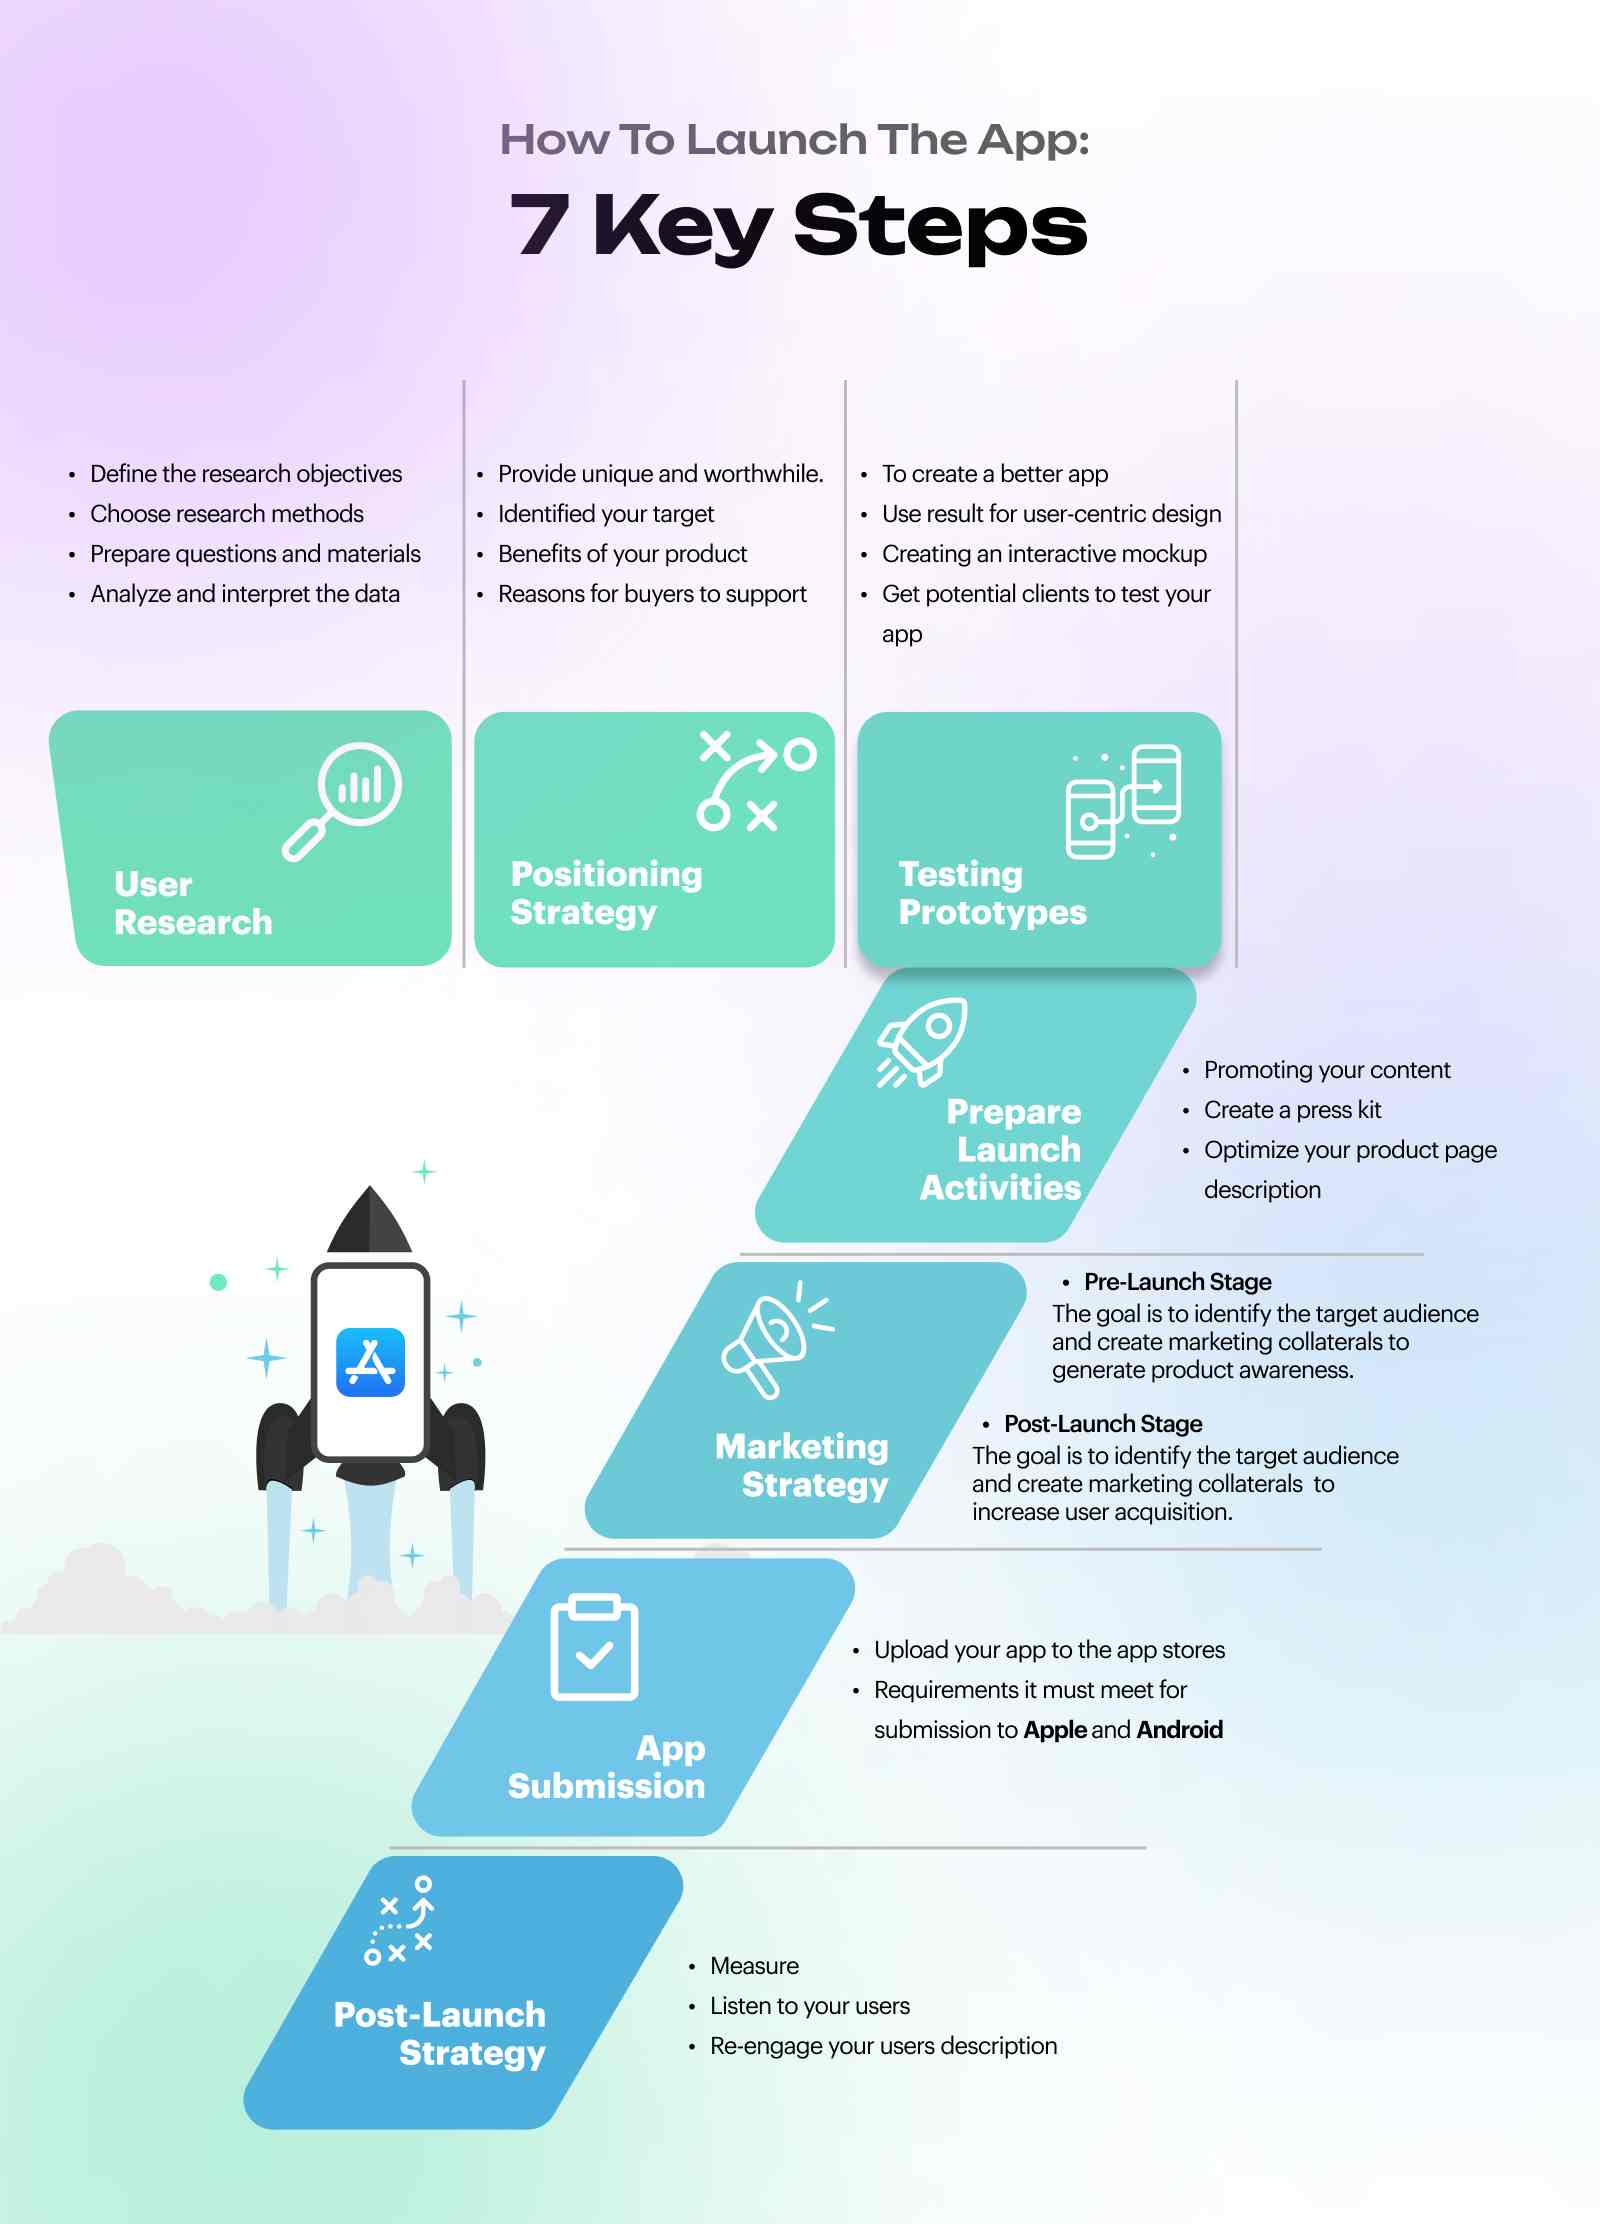 How To Launch App: Info-graphic